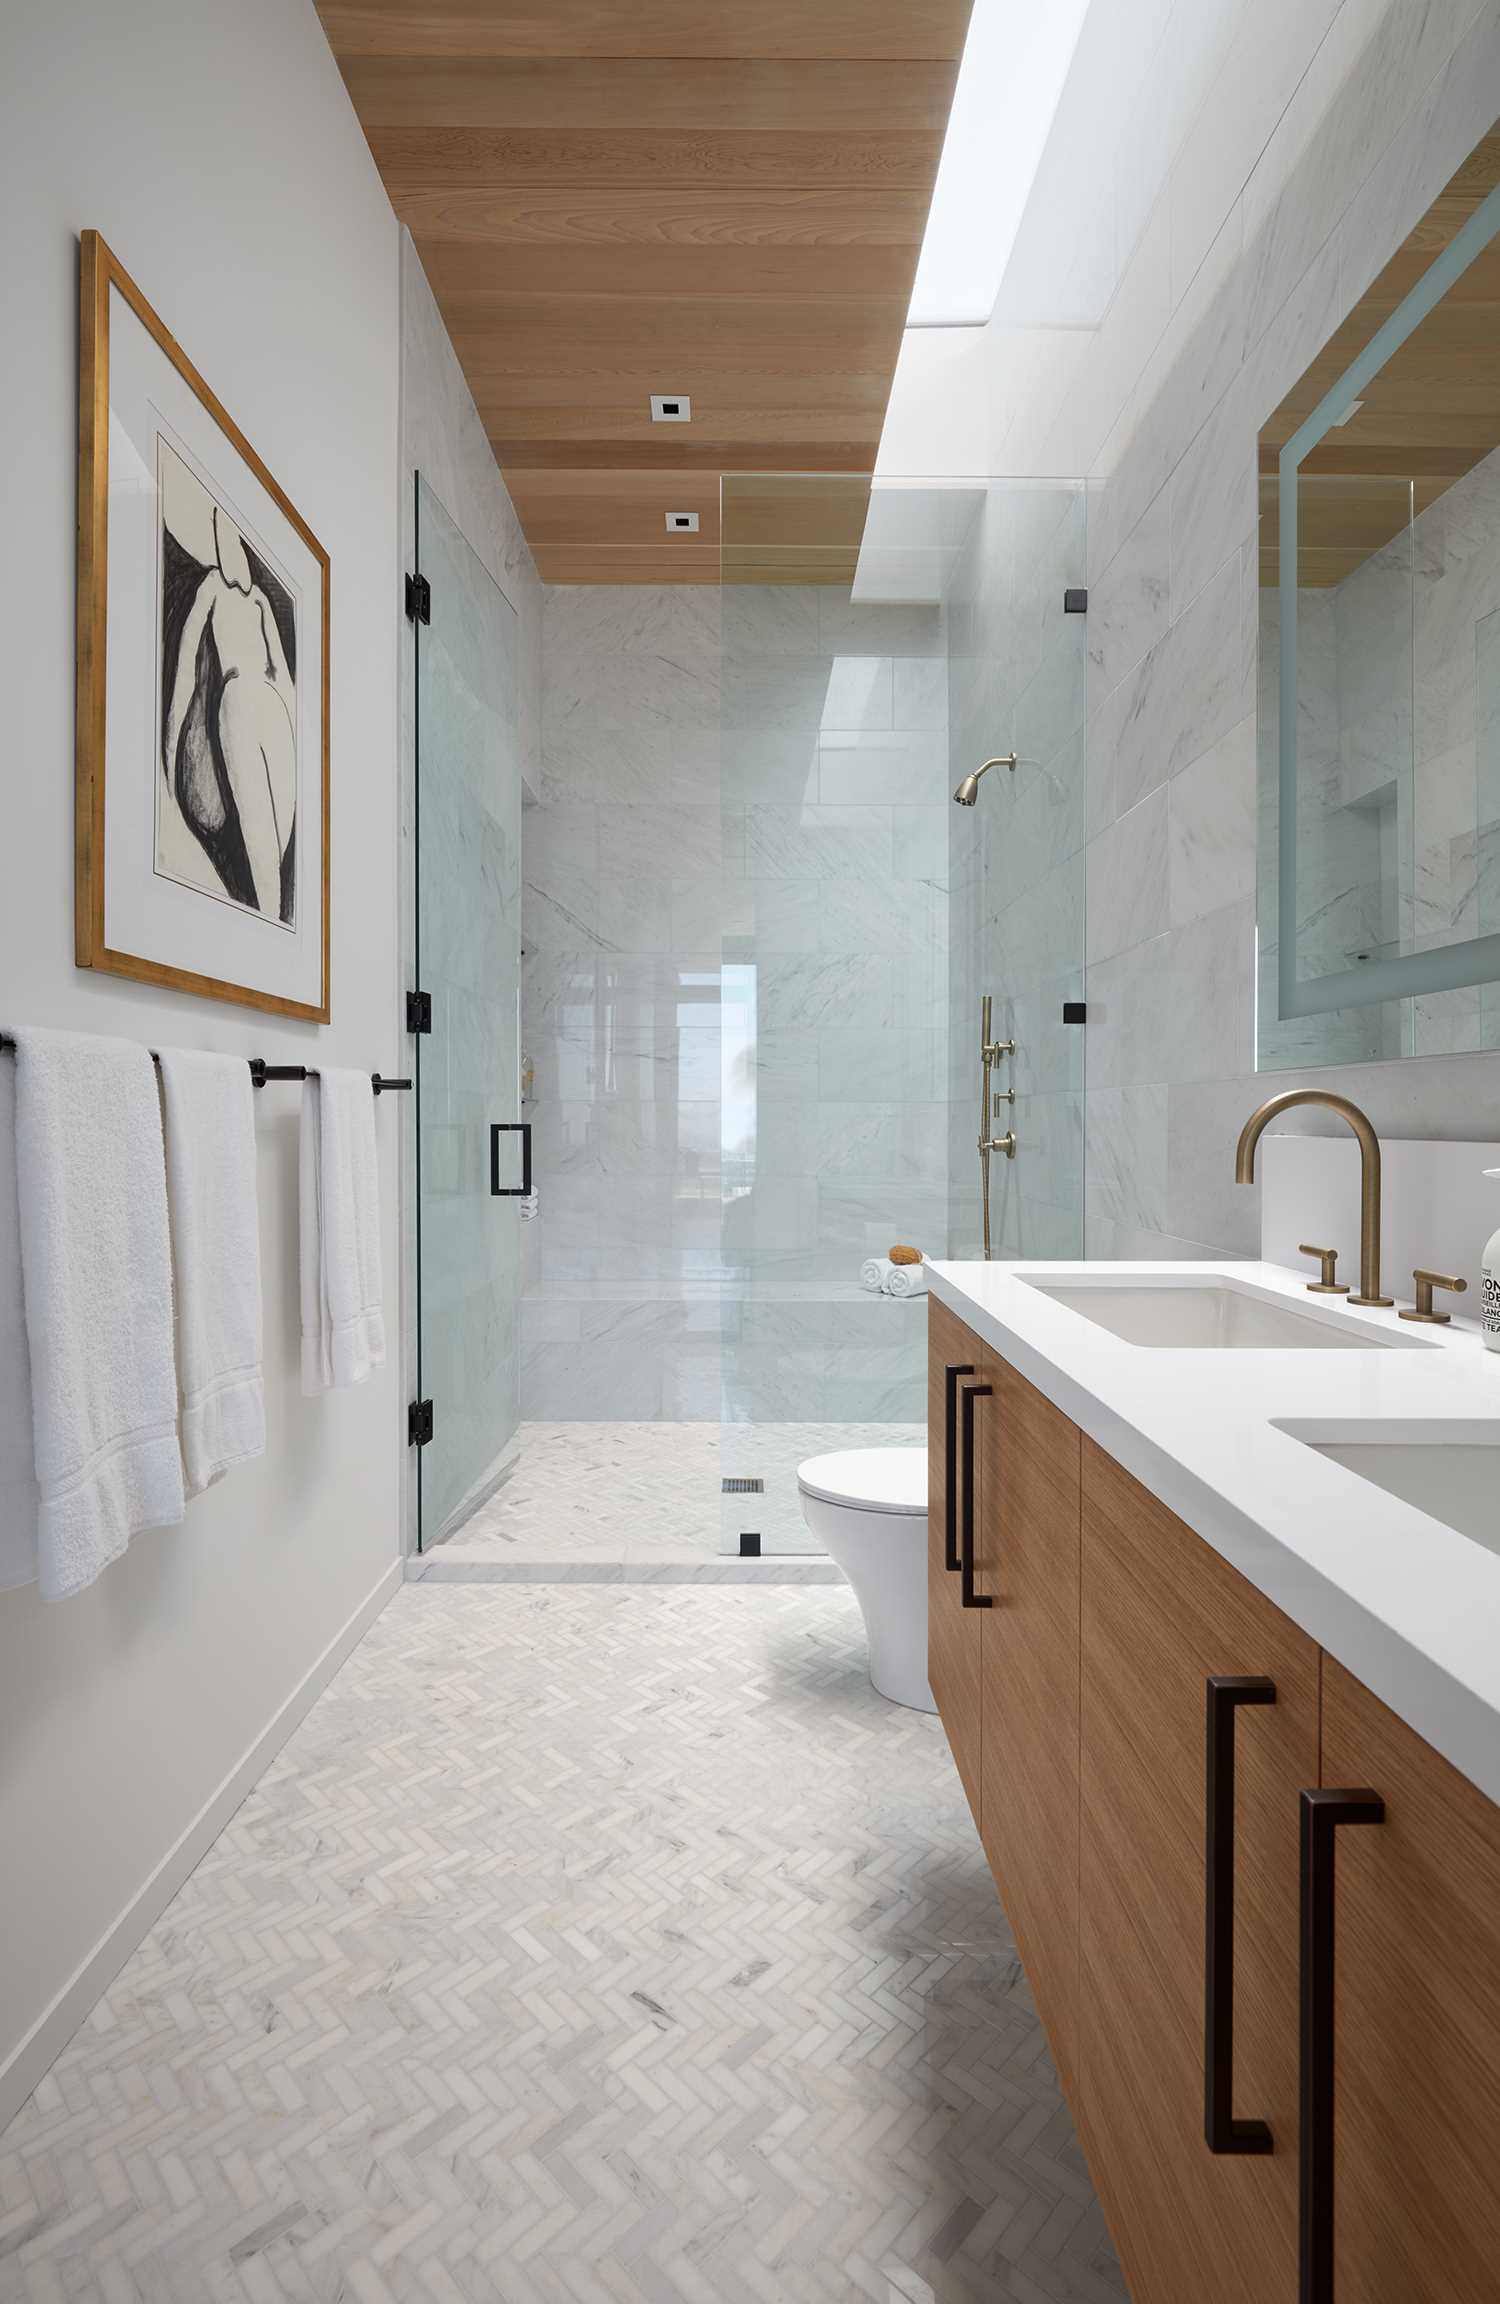 A modern bathroom with wood accents and light colored tiles.